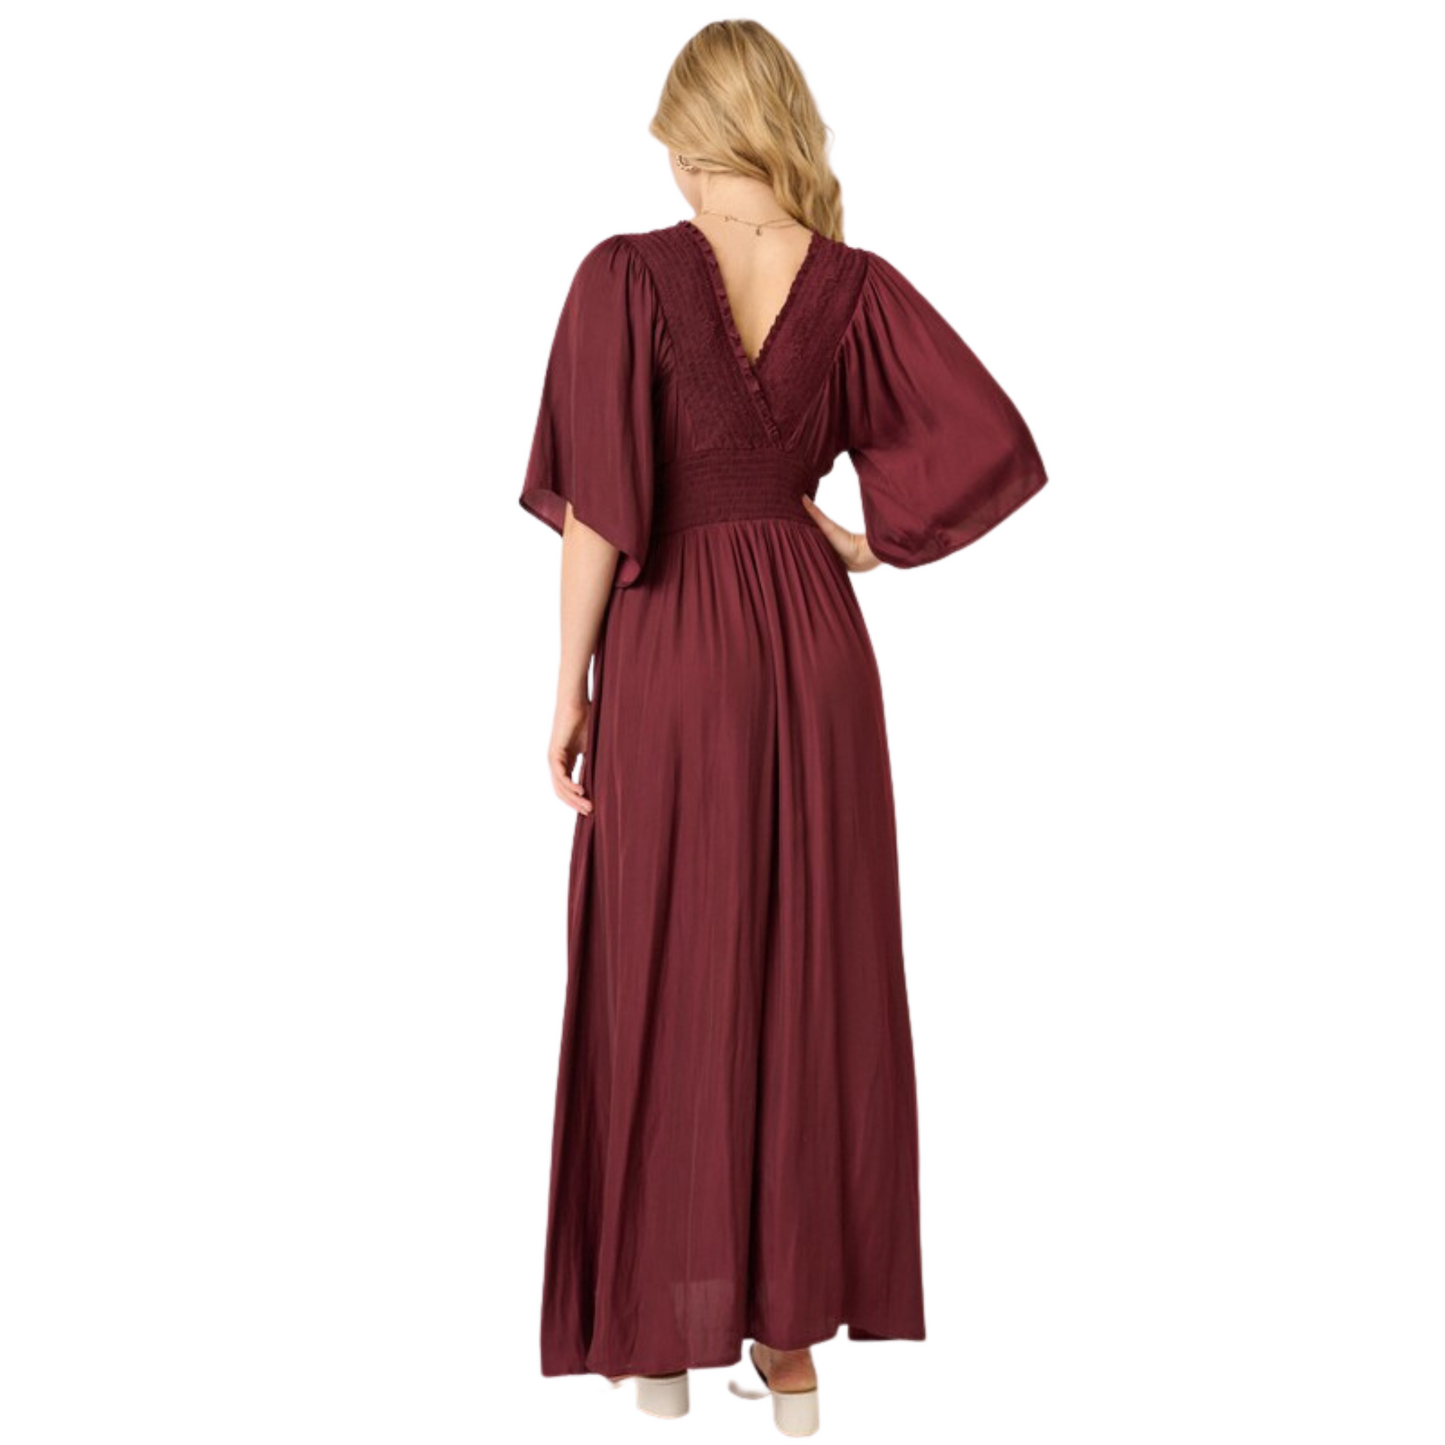 The Smock Detail Maxi Dress is made with luxurious satin woven fabric for a smooth and sophisticated look. Featuring smocking detail on the front and back, a surplice front, ruffle short sleeve and smocking detail waistband, this dress ensures a comfortable and flattering fit. Finished with a maxi length silhouette, this beautiful wine-colored dress is perfect for any special occasion.